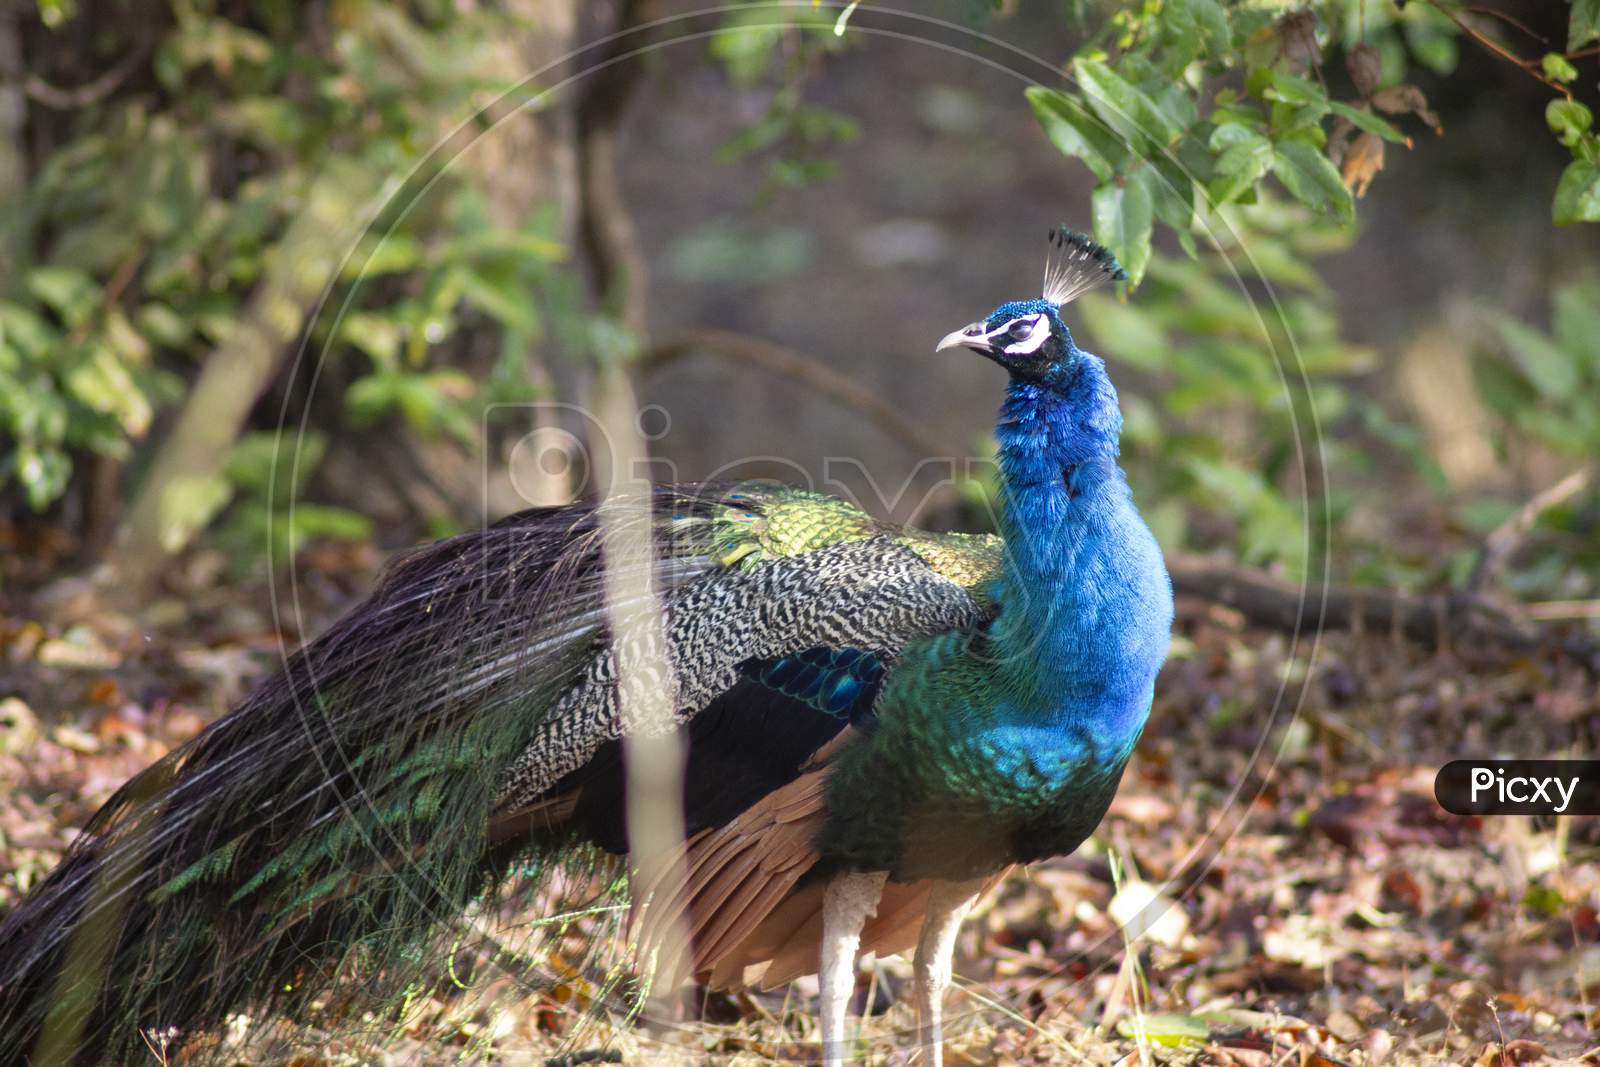 Peacock of India